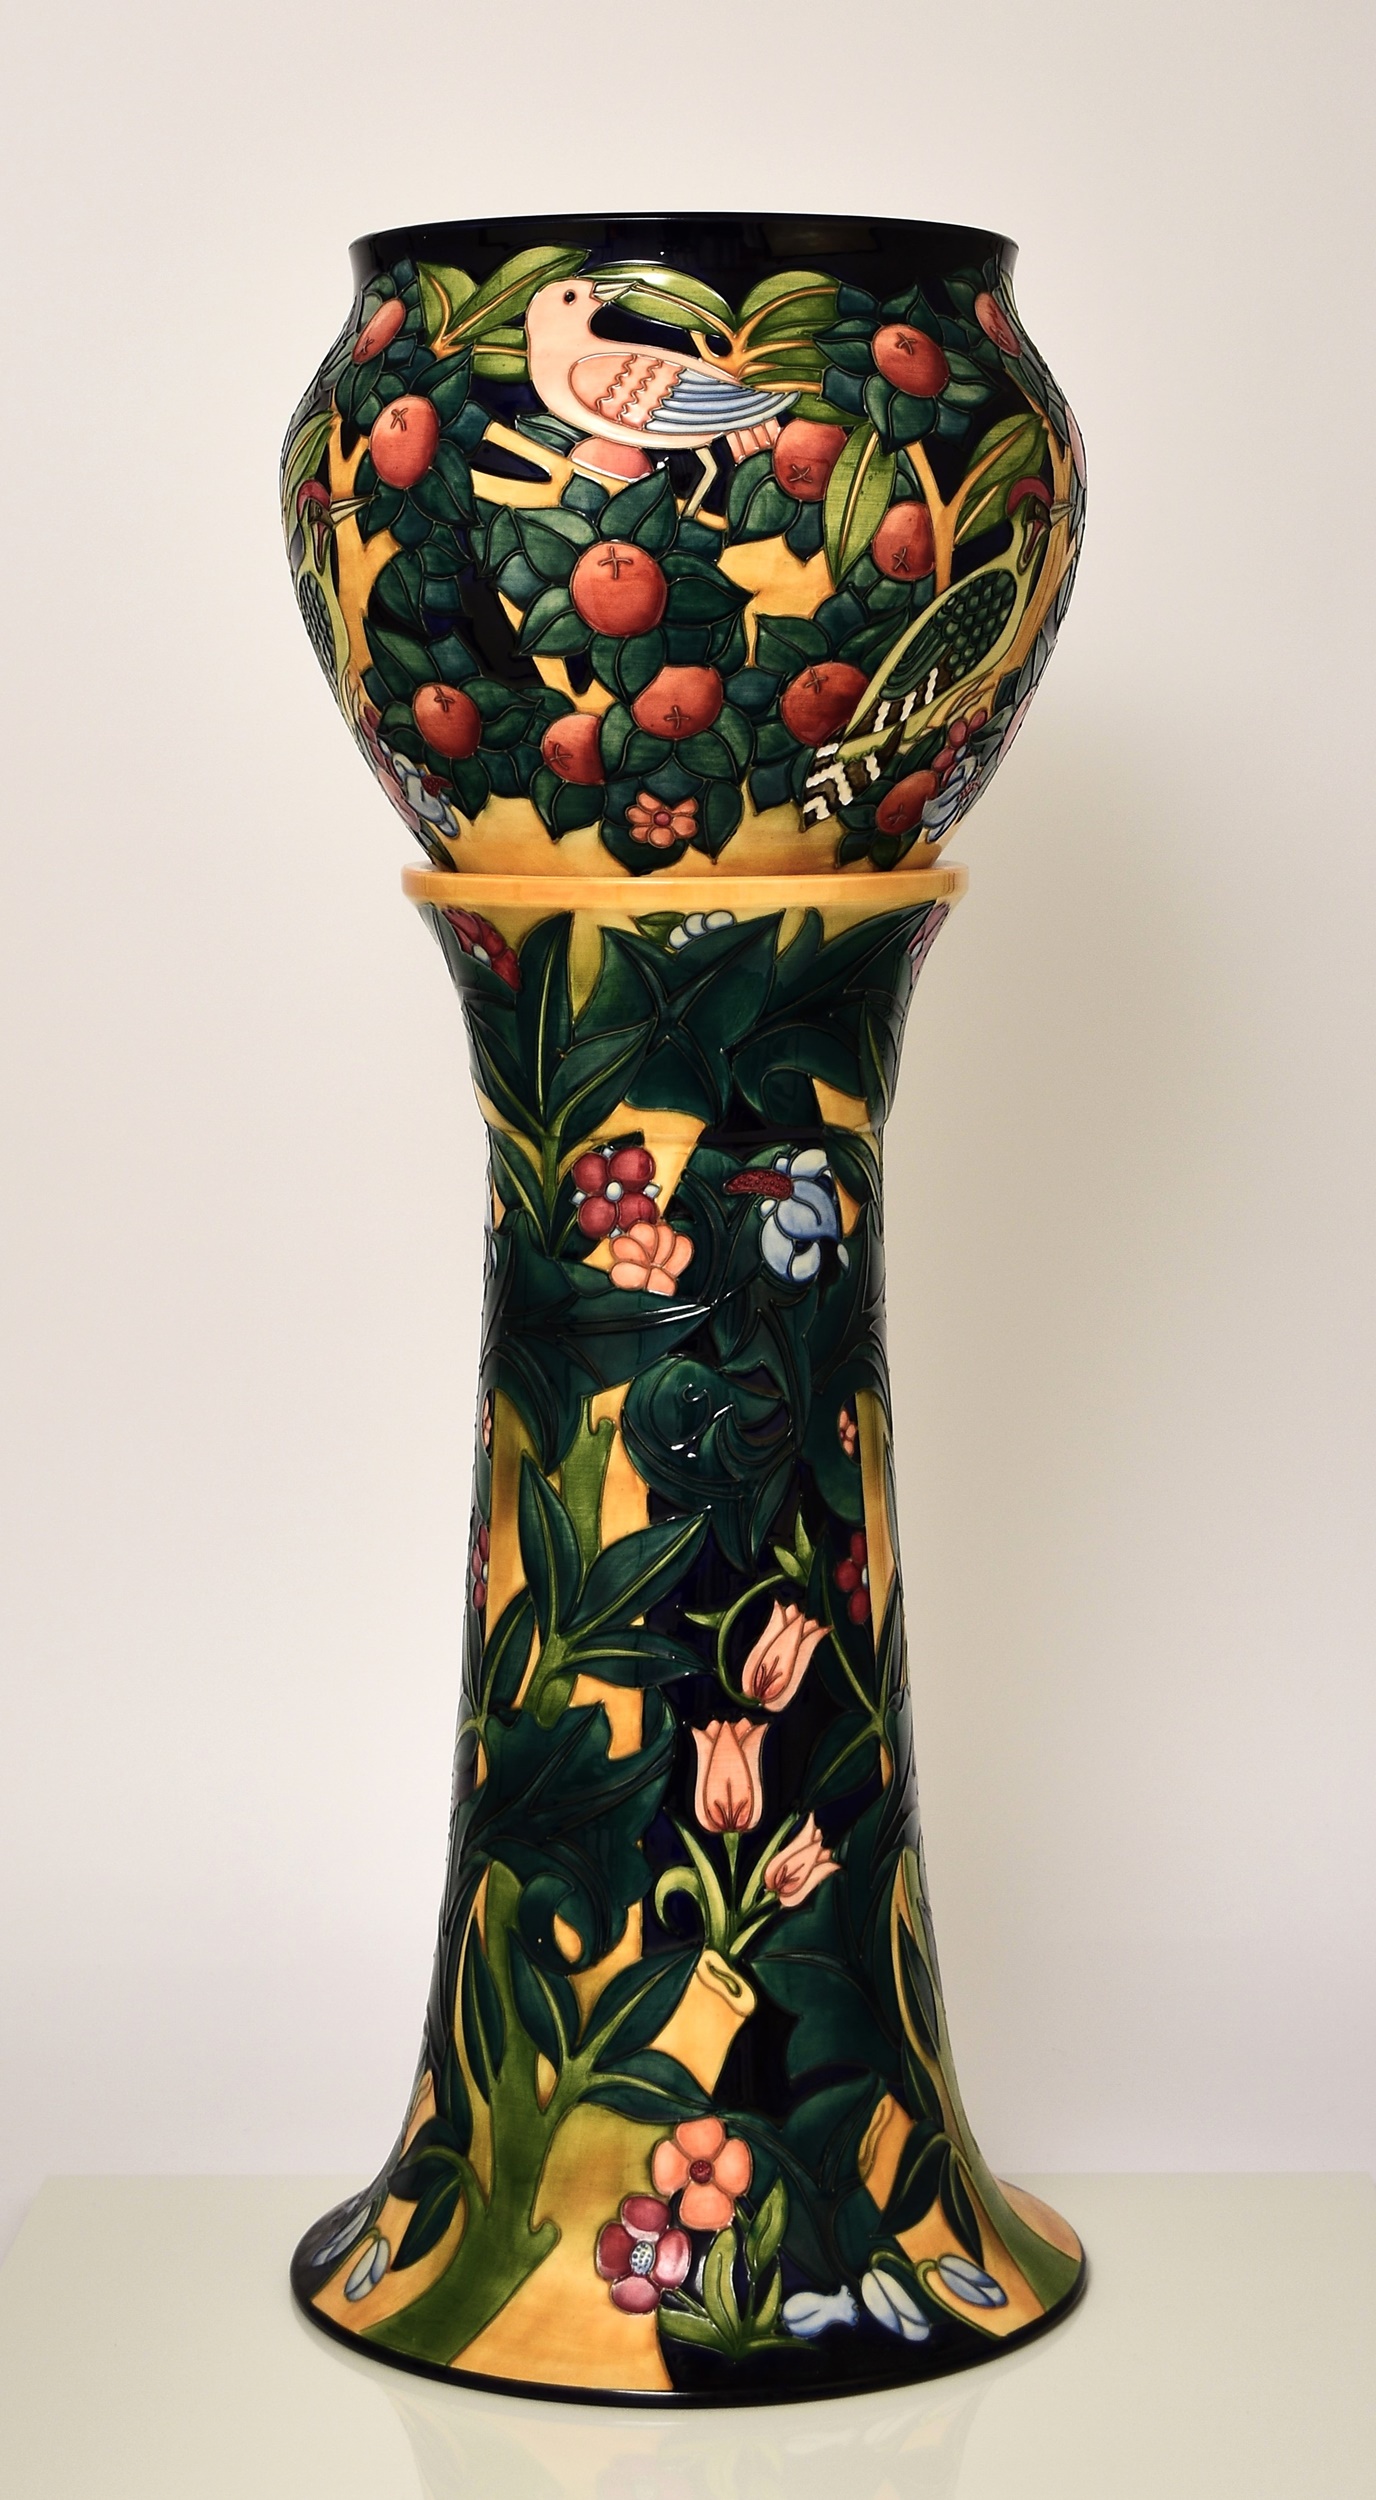 A Moorcroft Prestige jardiniere and stand in the ‘Tree Bark Thief’ pattern